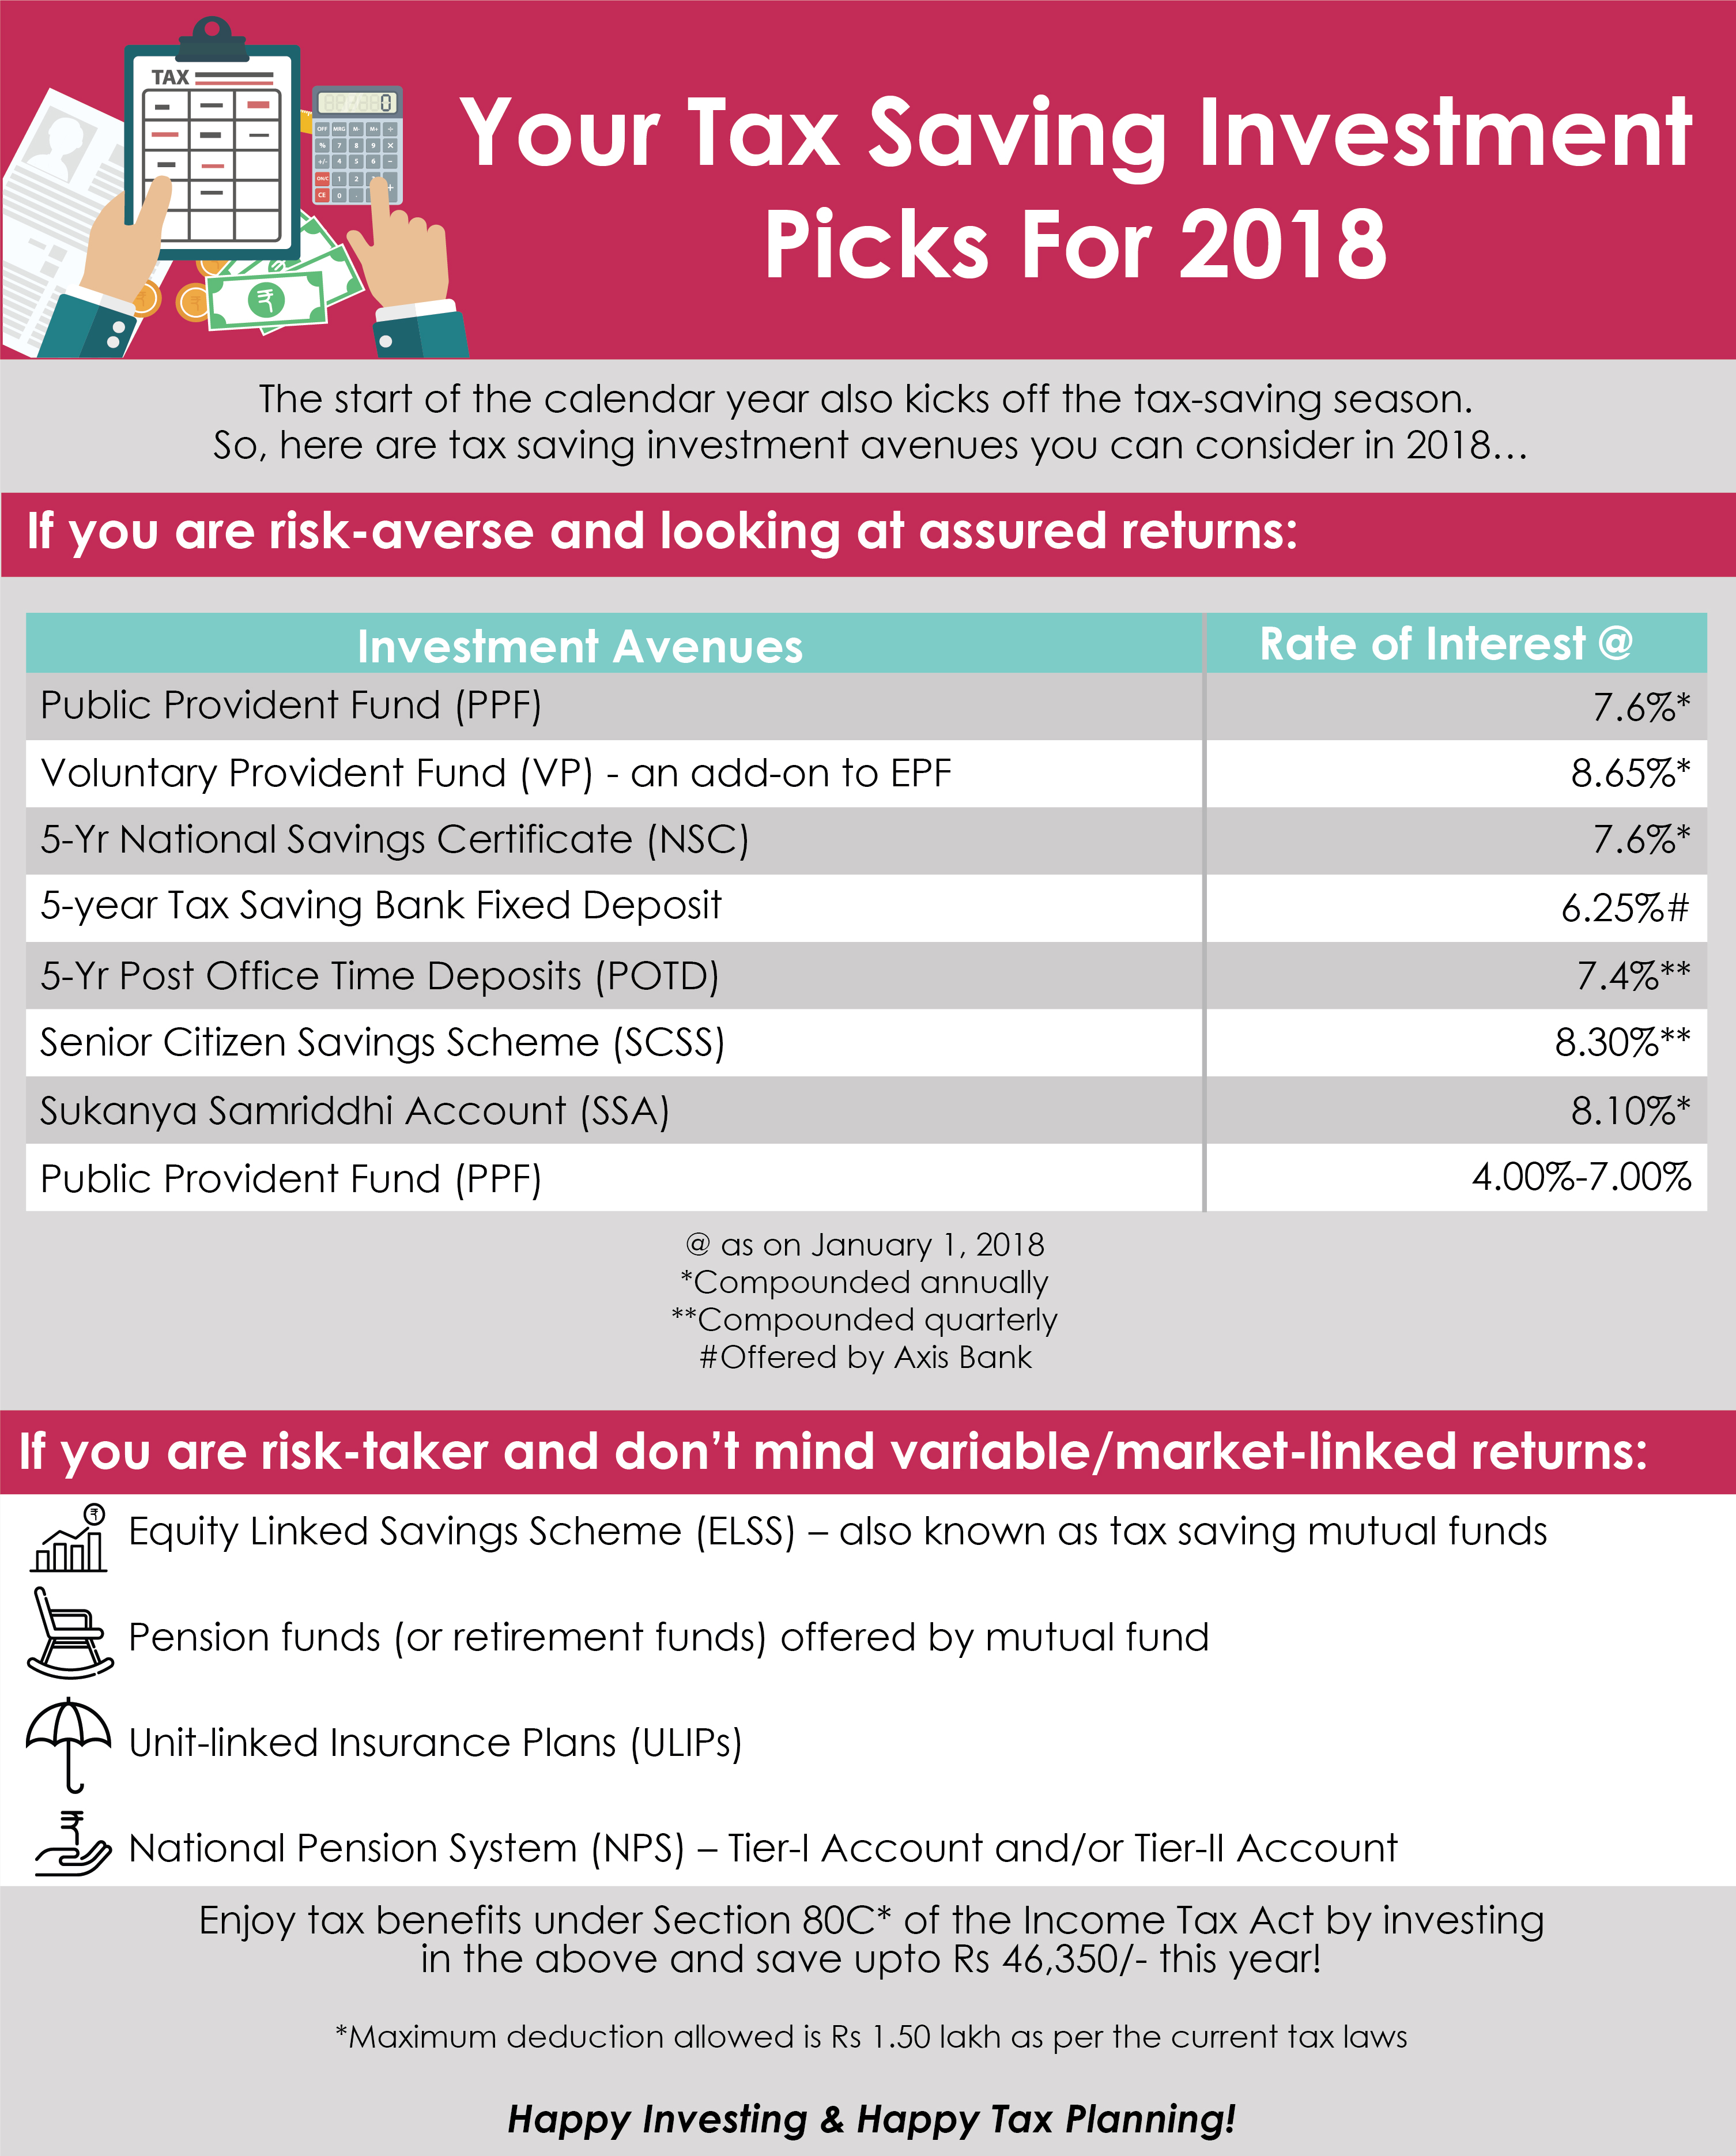 Tax Saving Investment Picks For 2018 